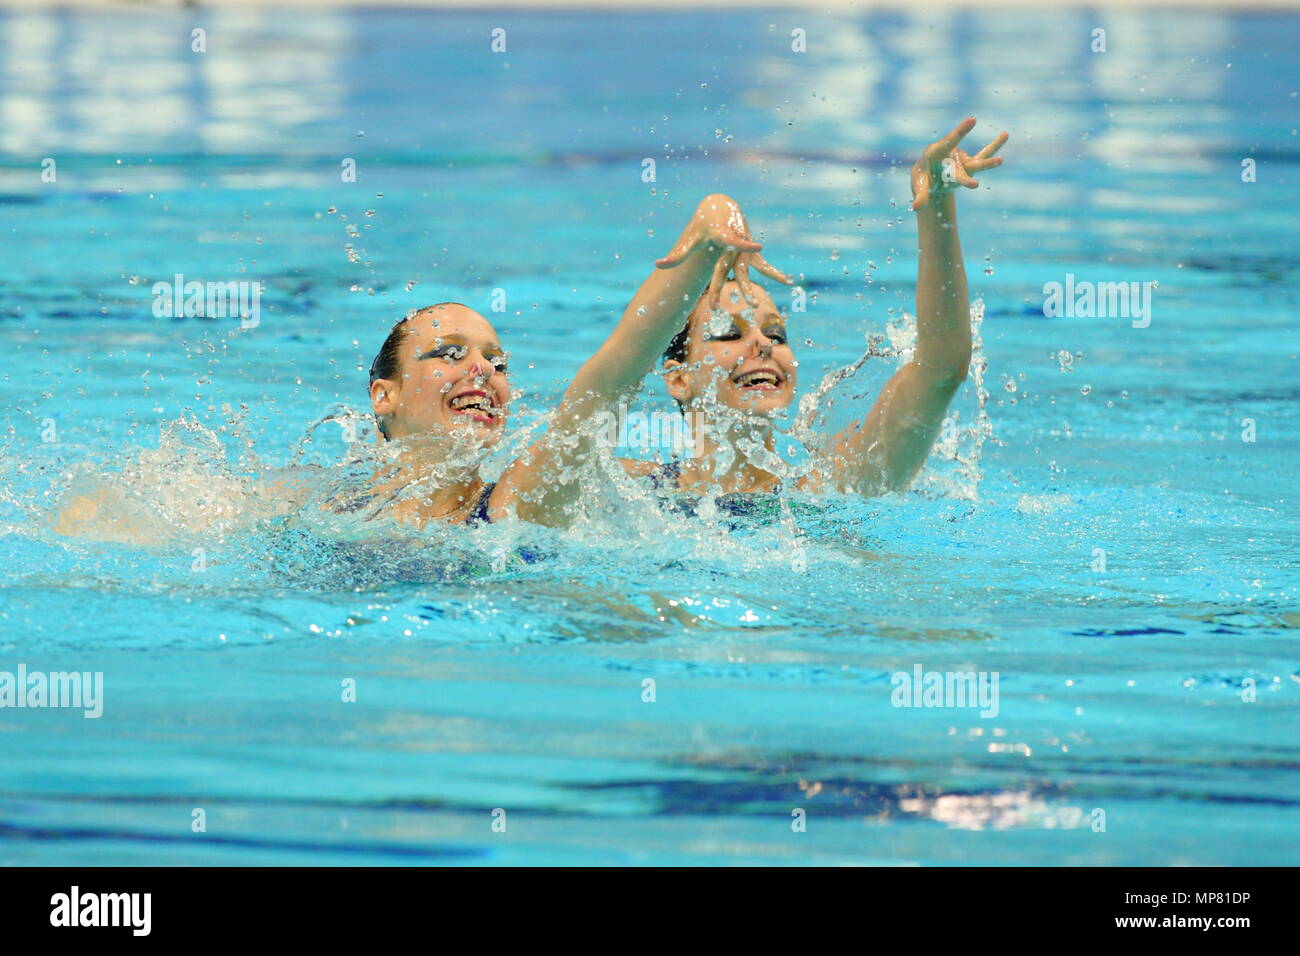 The Duets Team from Hungary CZEKUS Eszter and KISS Szofi during the Free Routine of the Fina Synchronised Swimming event at the Aquatic Centre London Olympic Park 22 April 2012 --- Image by © Paul Cunningham Stock Photo